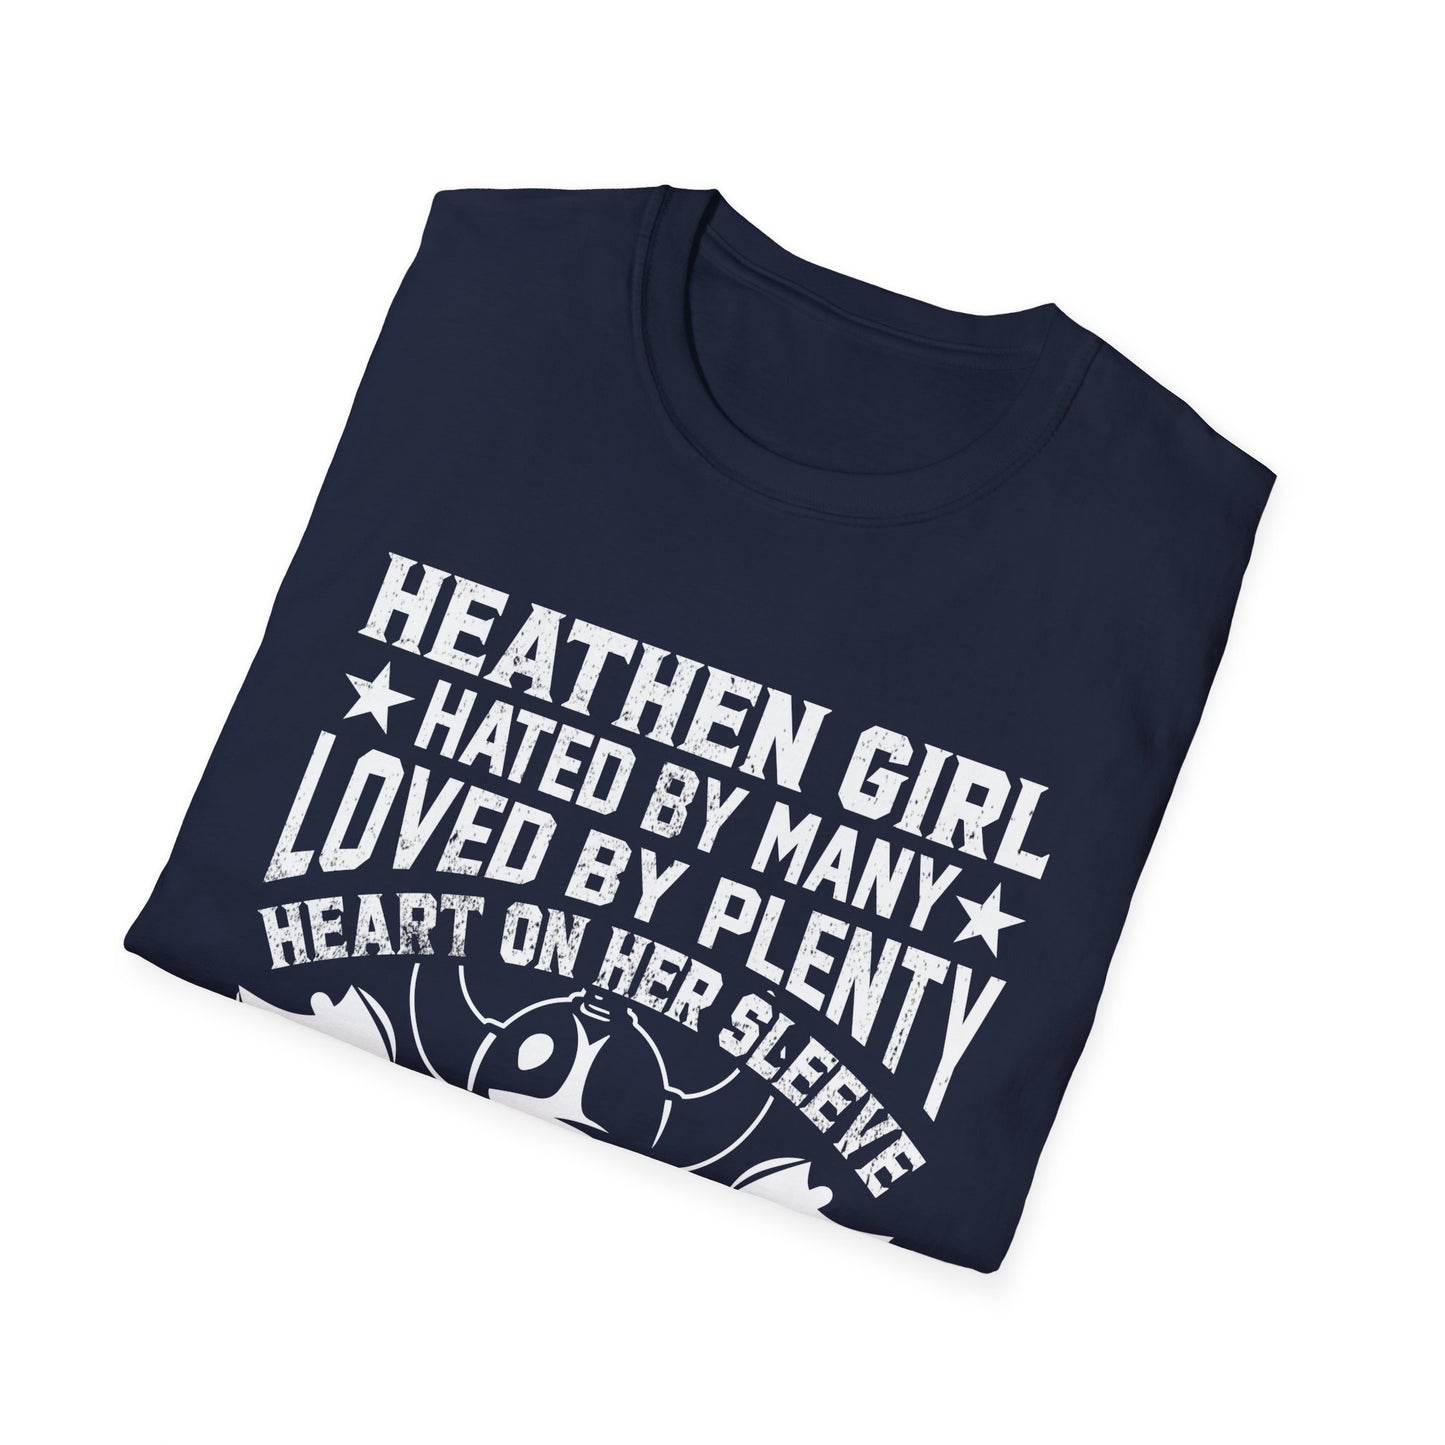 Heathen Girl- Hated By Many Loved By Plenty Heart On Her Sleeve Fire In Her Soul & A Mouth She Can't Control Viking T-Shirt